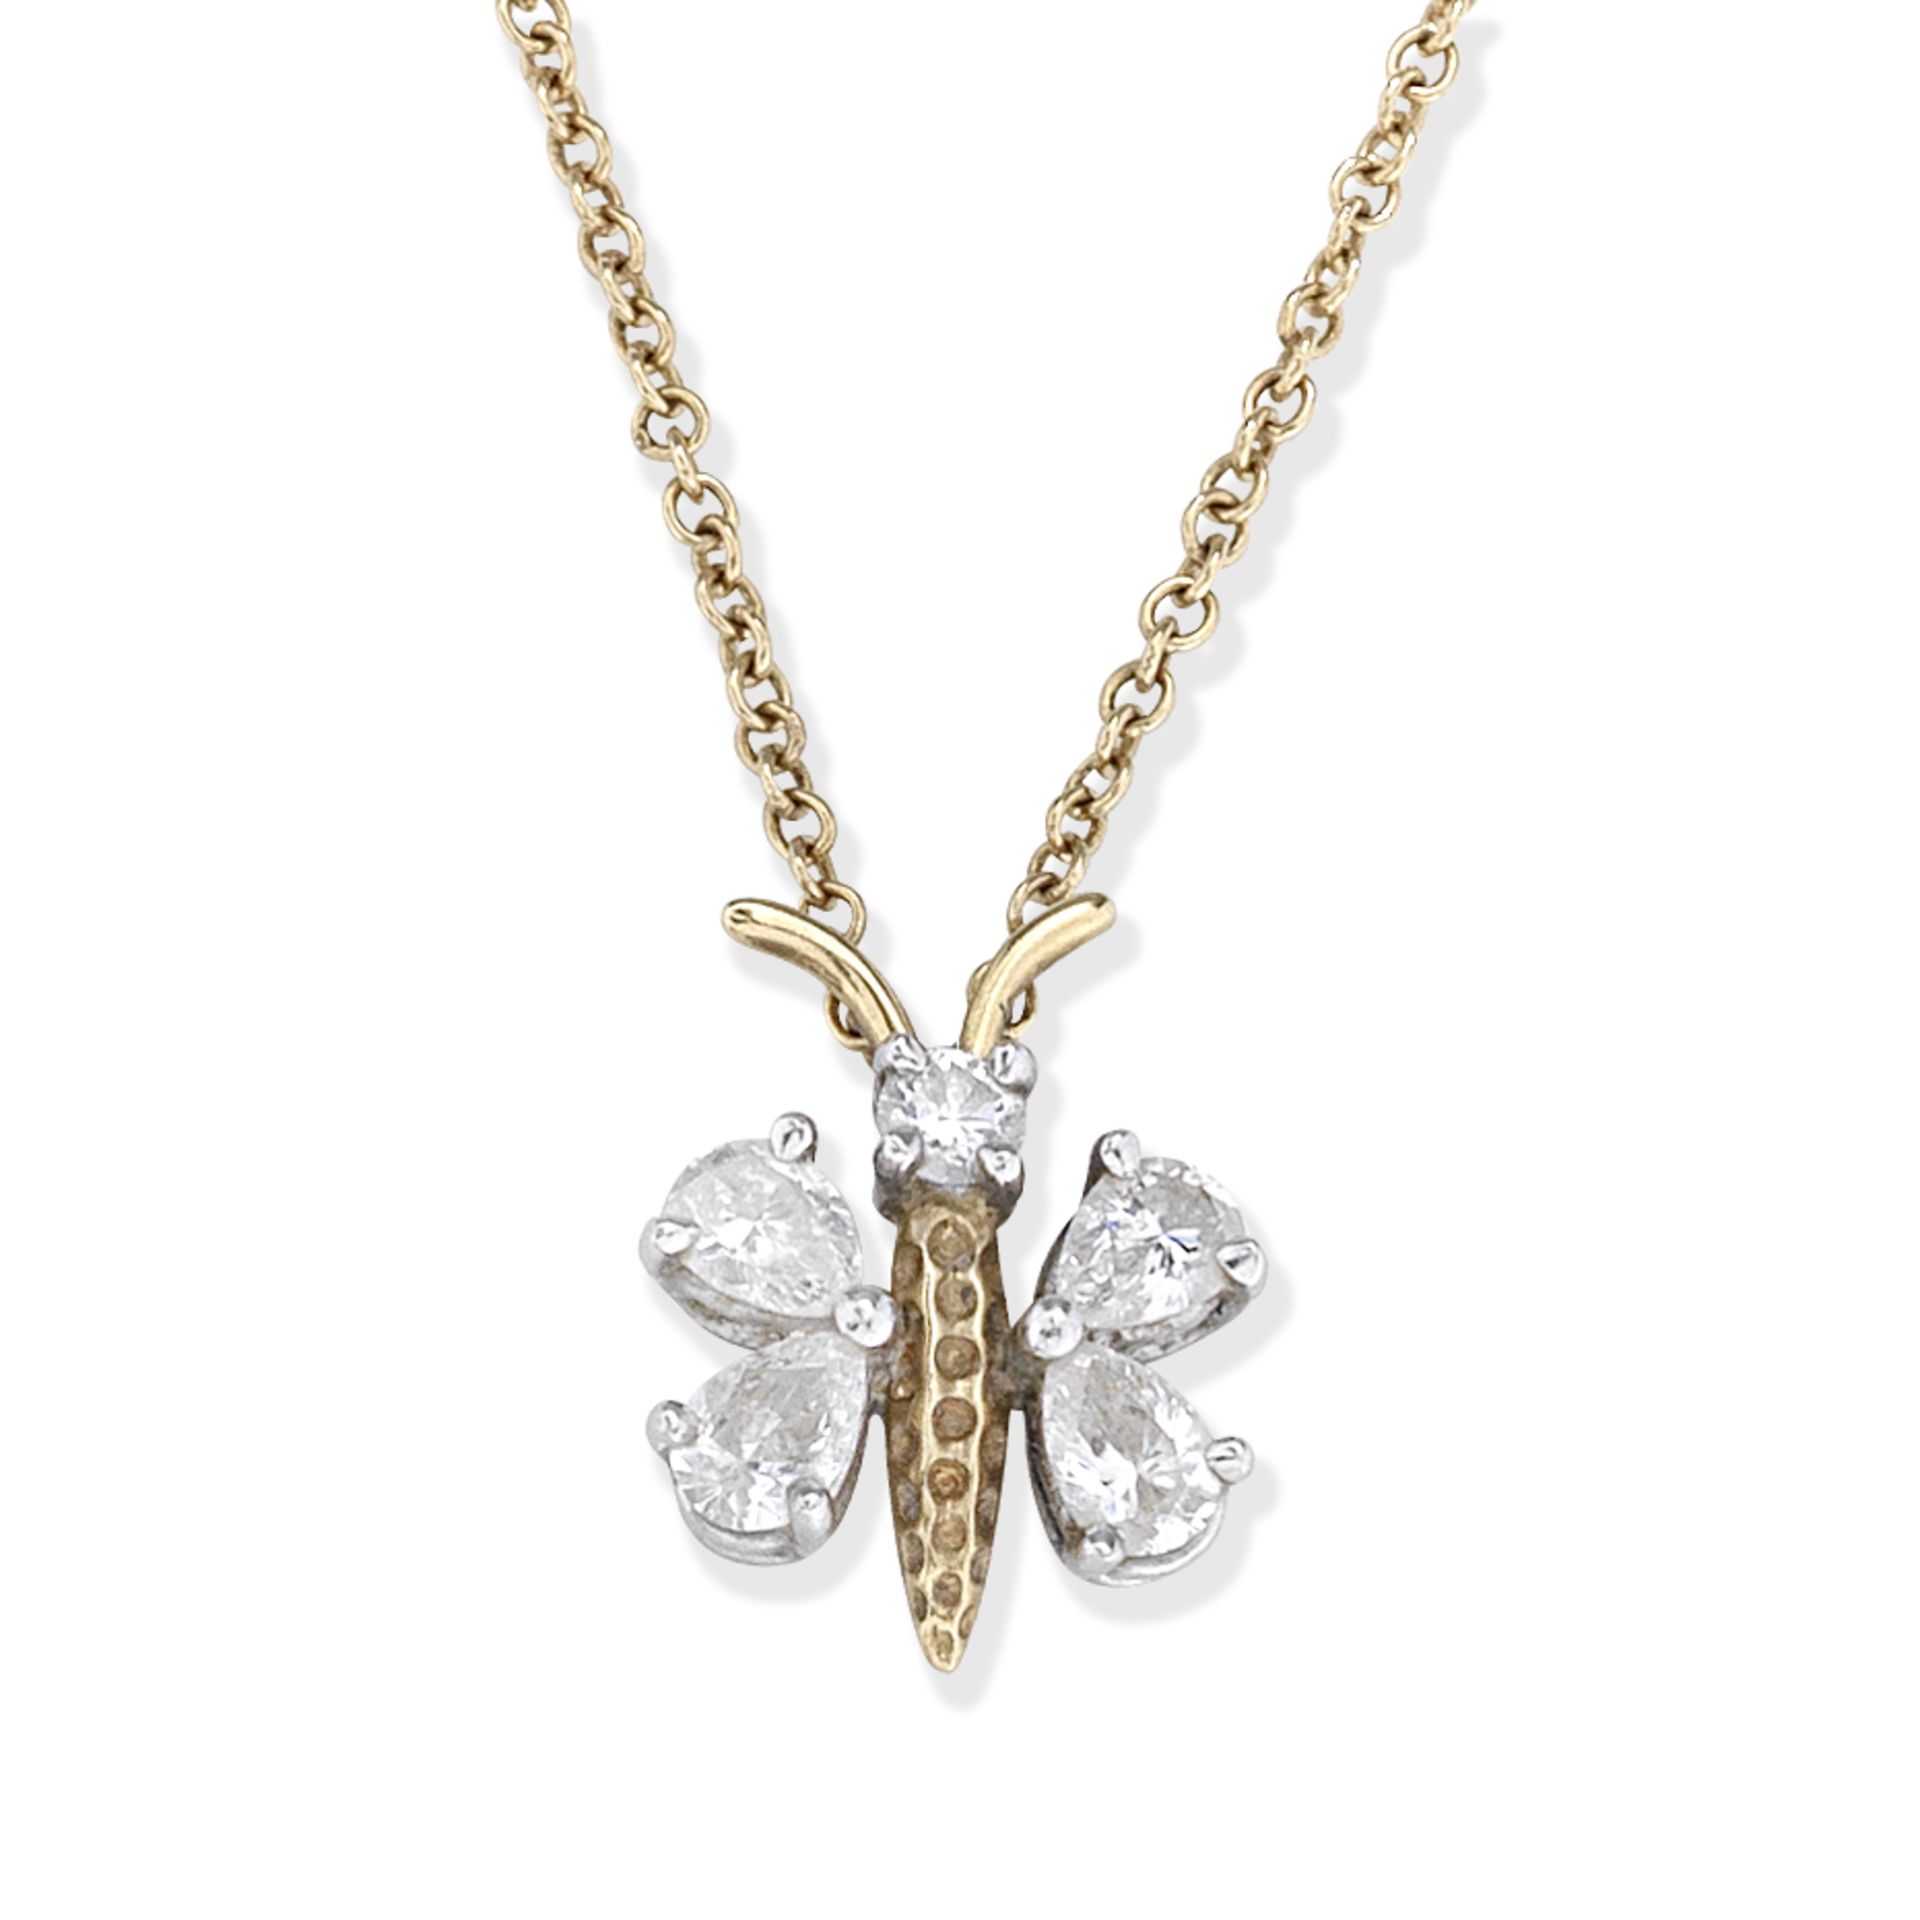 SCHLUMBERGER FOR TIFFANY: BUTTERFLY DIAMOND NECKLACE